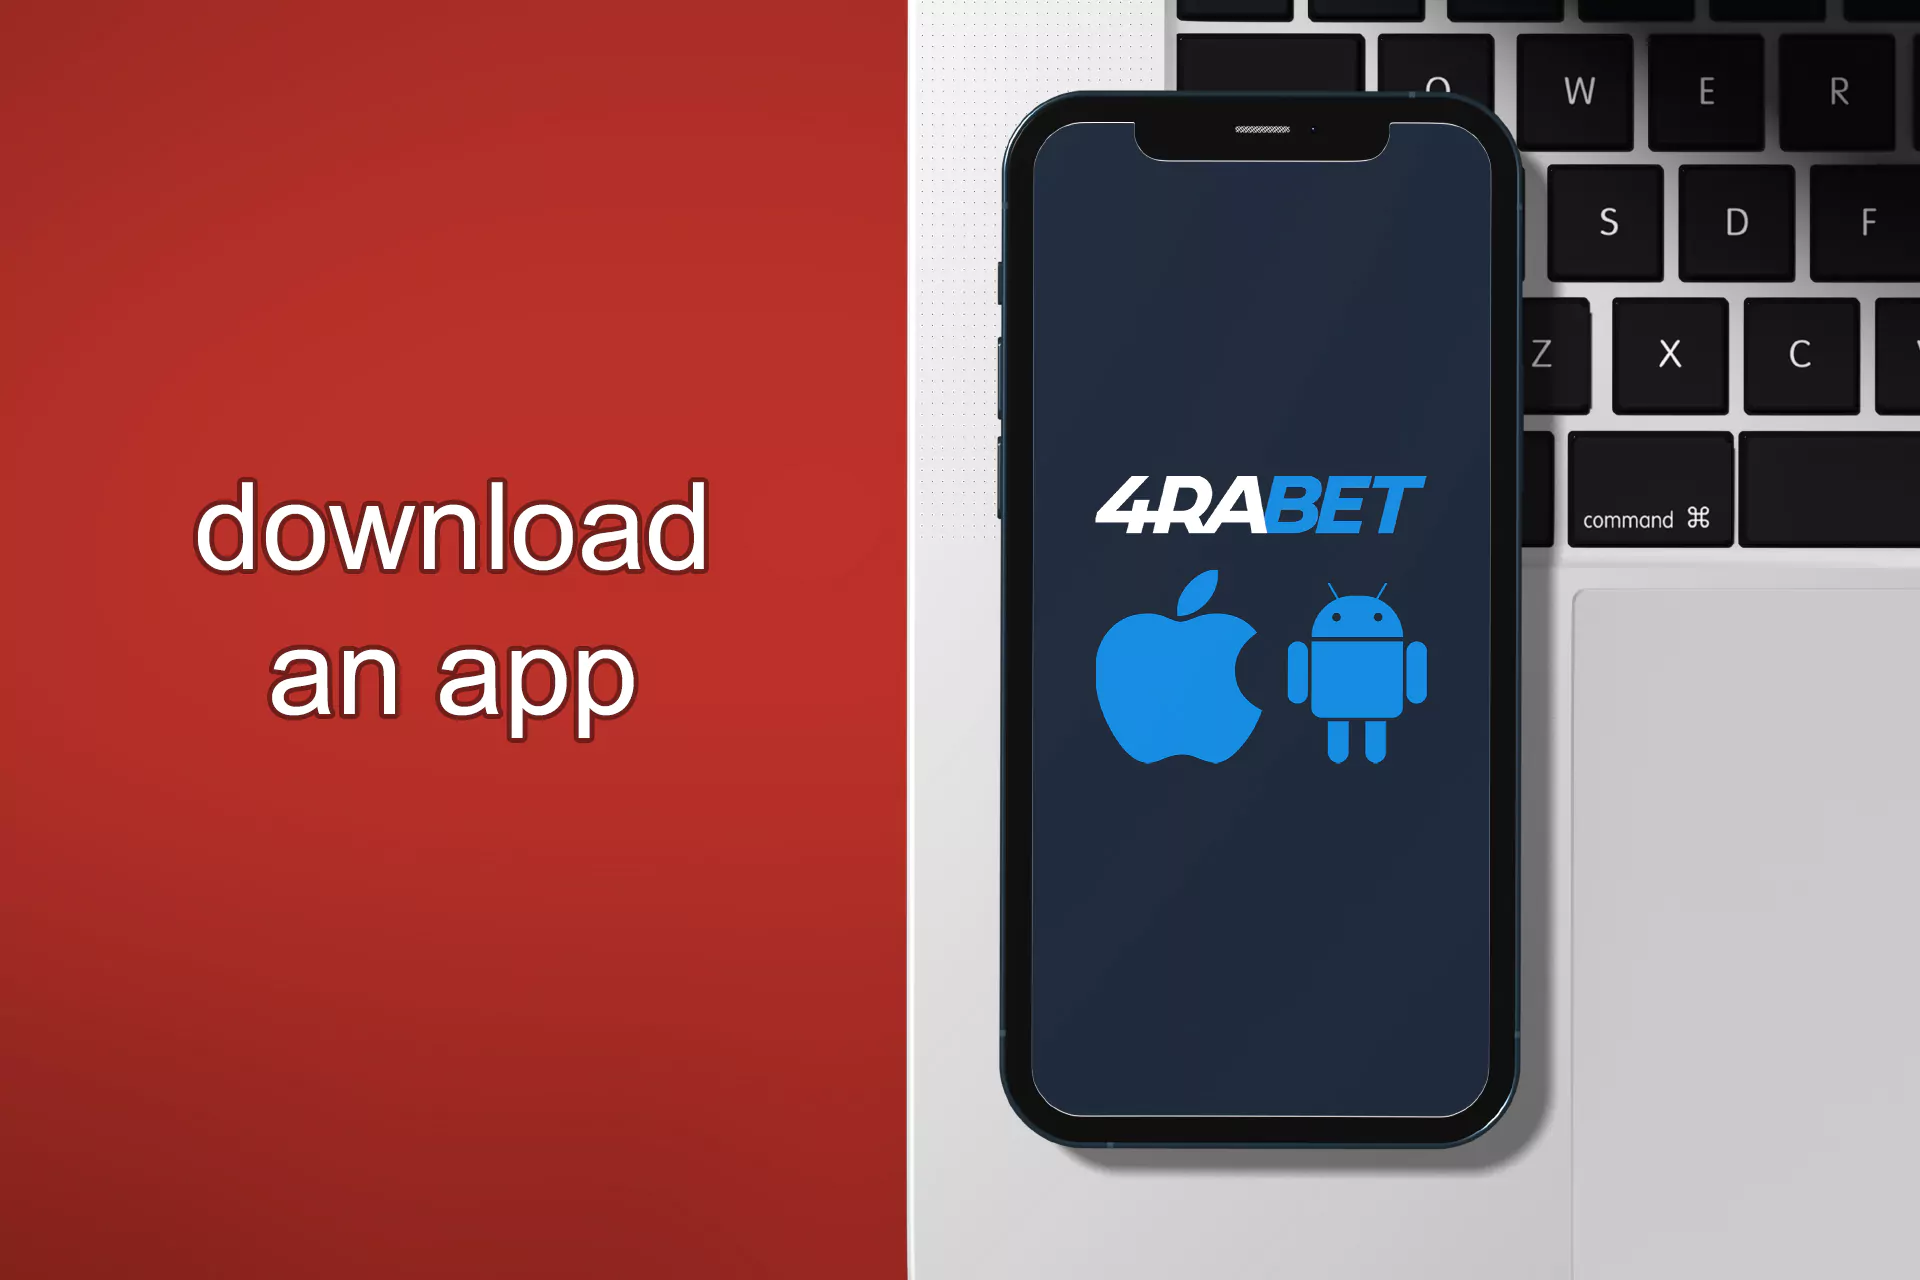 Download the Android or iOS app depending on the smartphone you have.